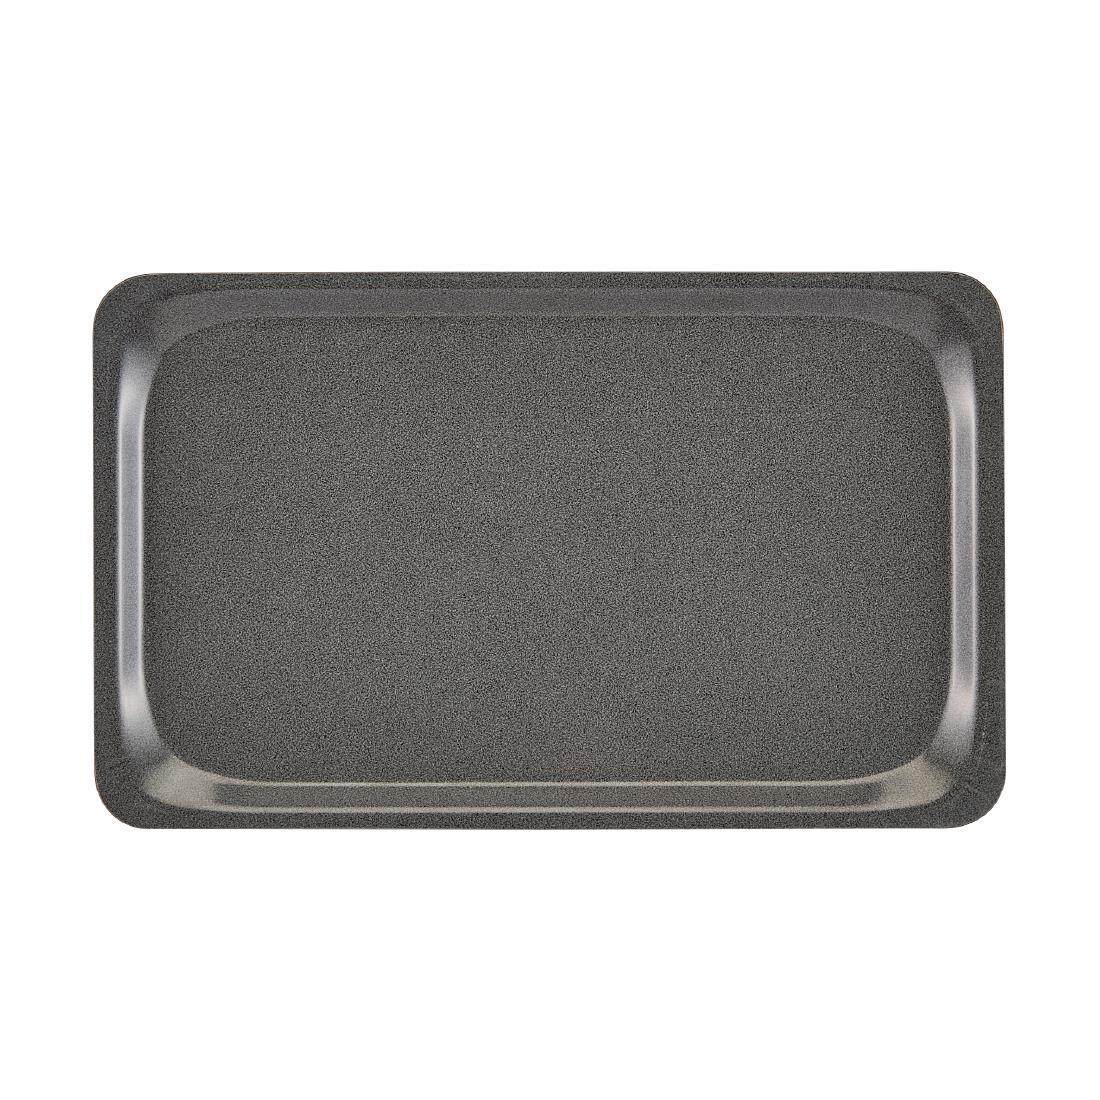 Cambro Capri Tray Smooth Surface Charcoal 320x530mm